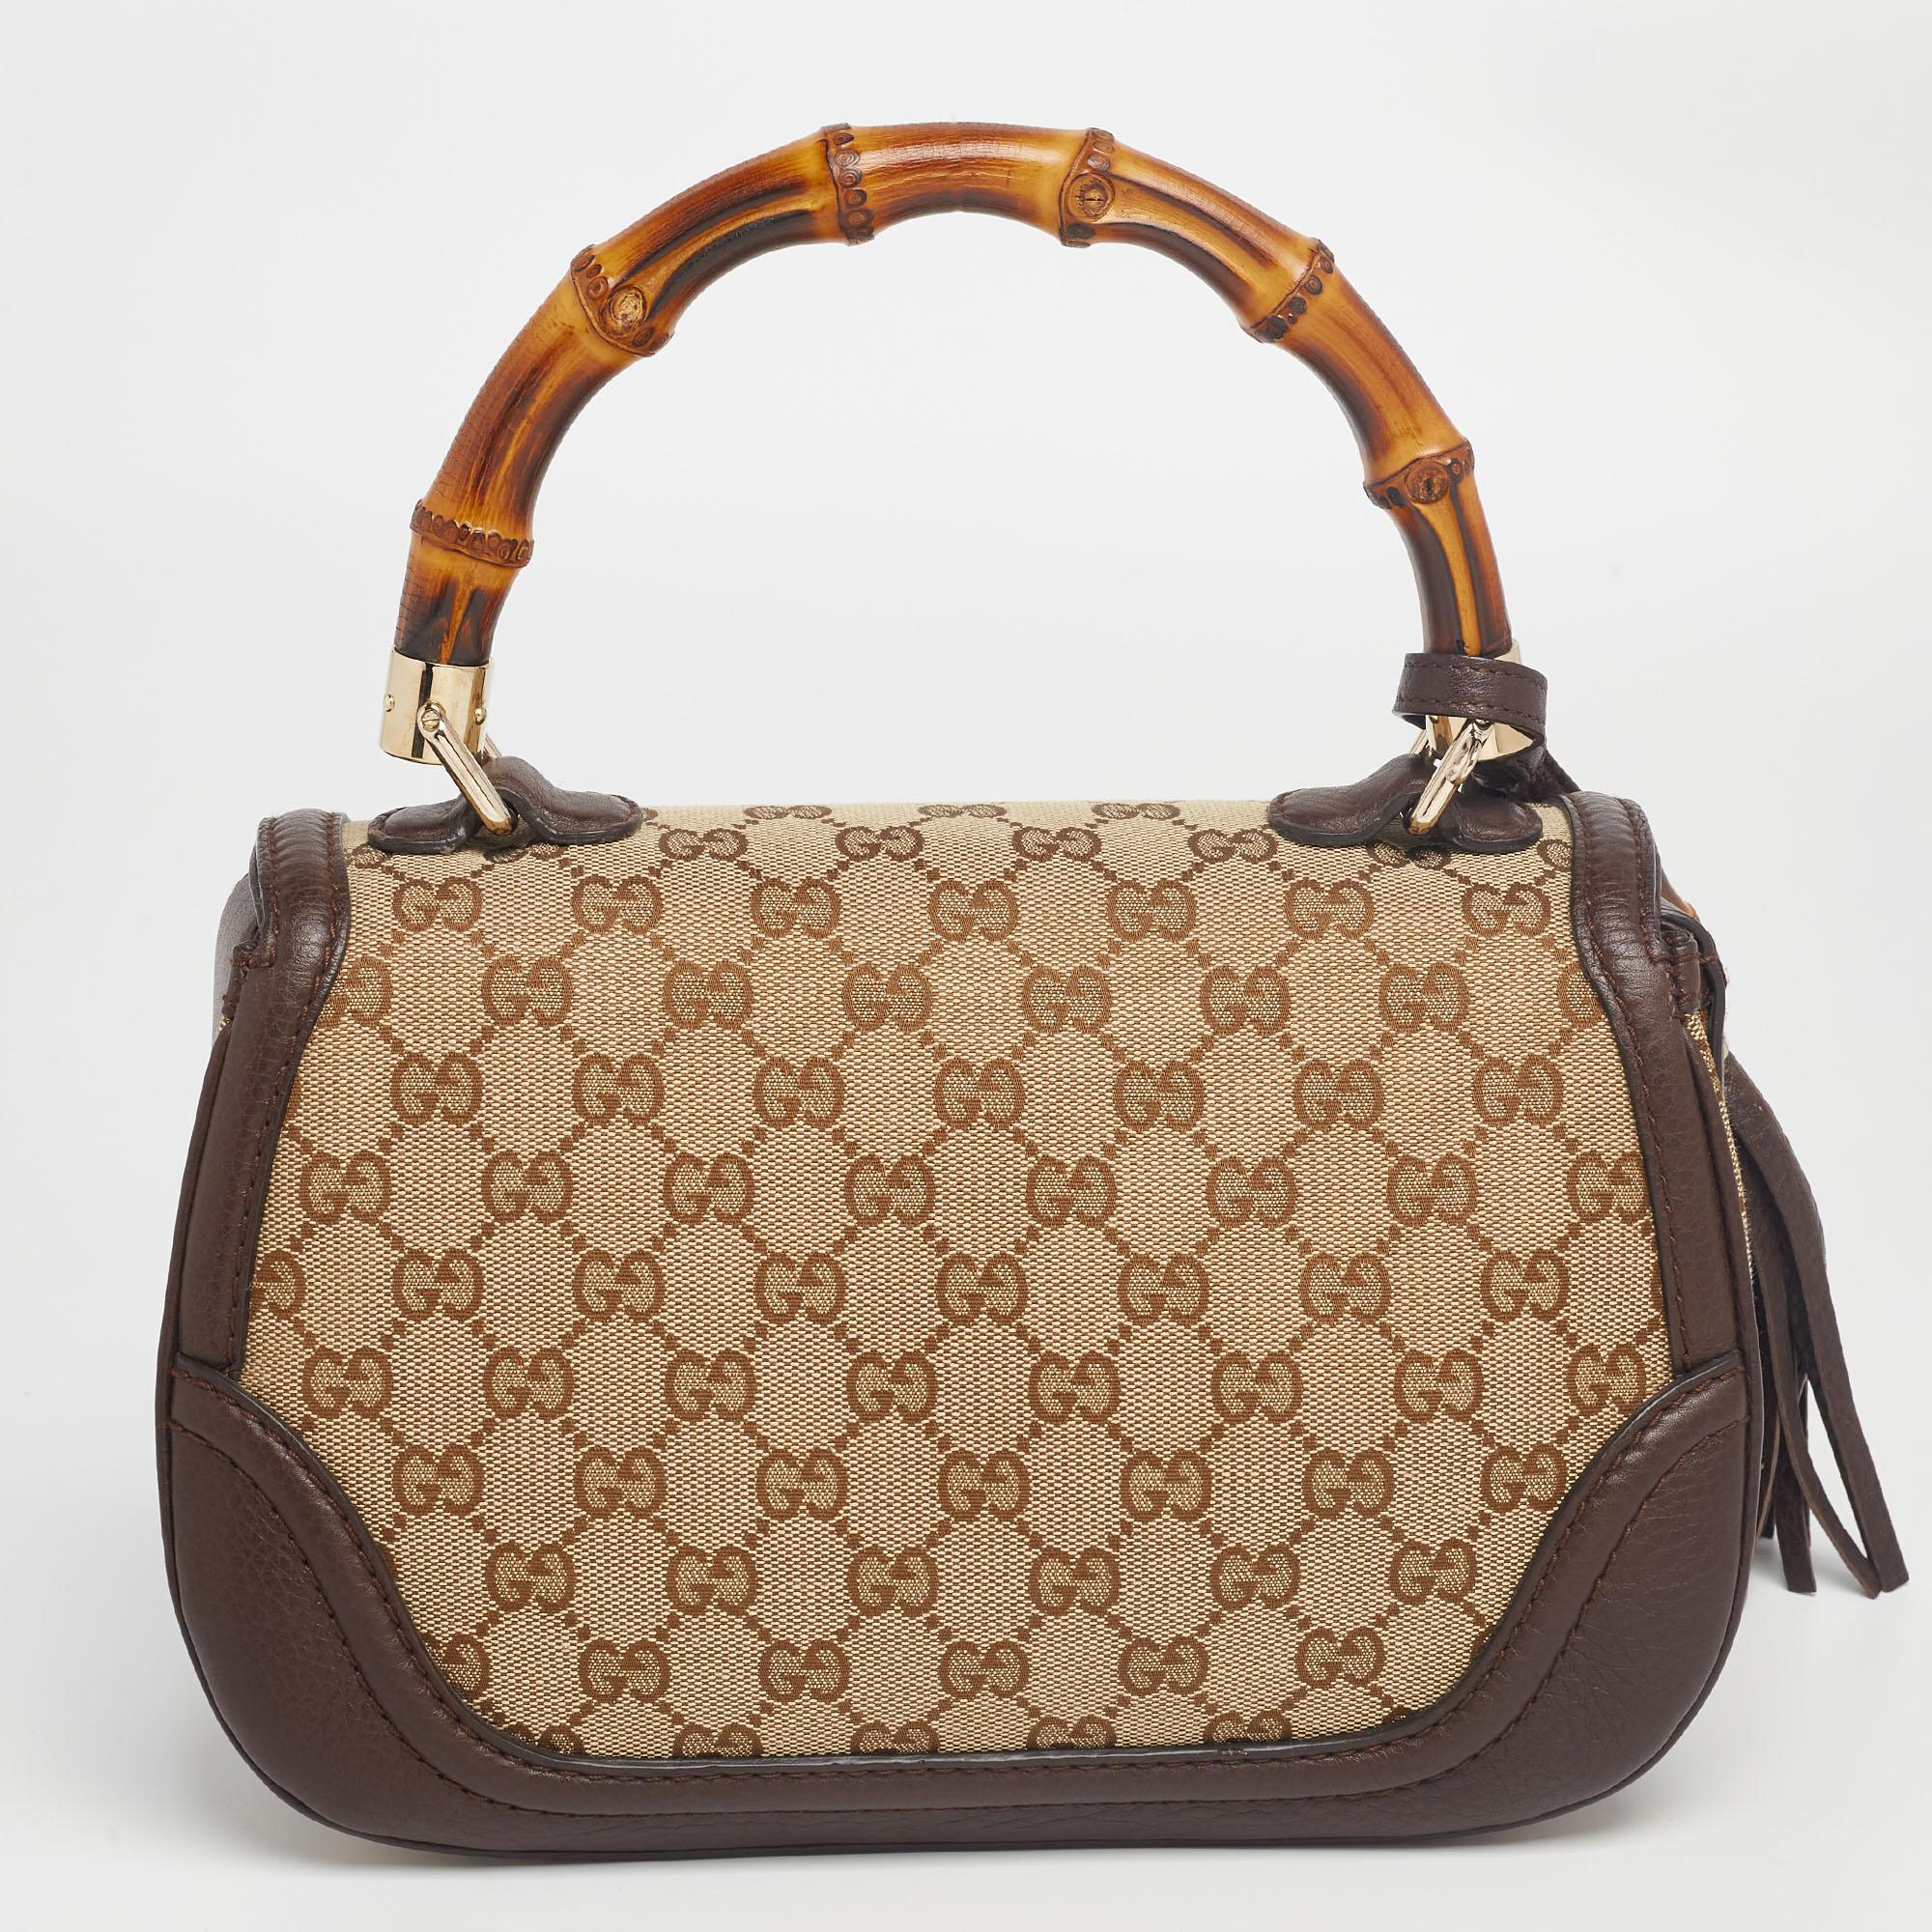 This Gucci bag combines style and elegance into the ultimate everyday bag. Crafted in Italy, it is made from GG canvas and quality leather and comes in lovely shades. It is accented with a signature bamboo top handle. Secured with a bamboo turn-lock